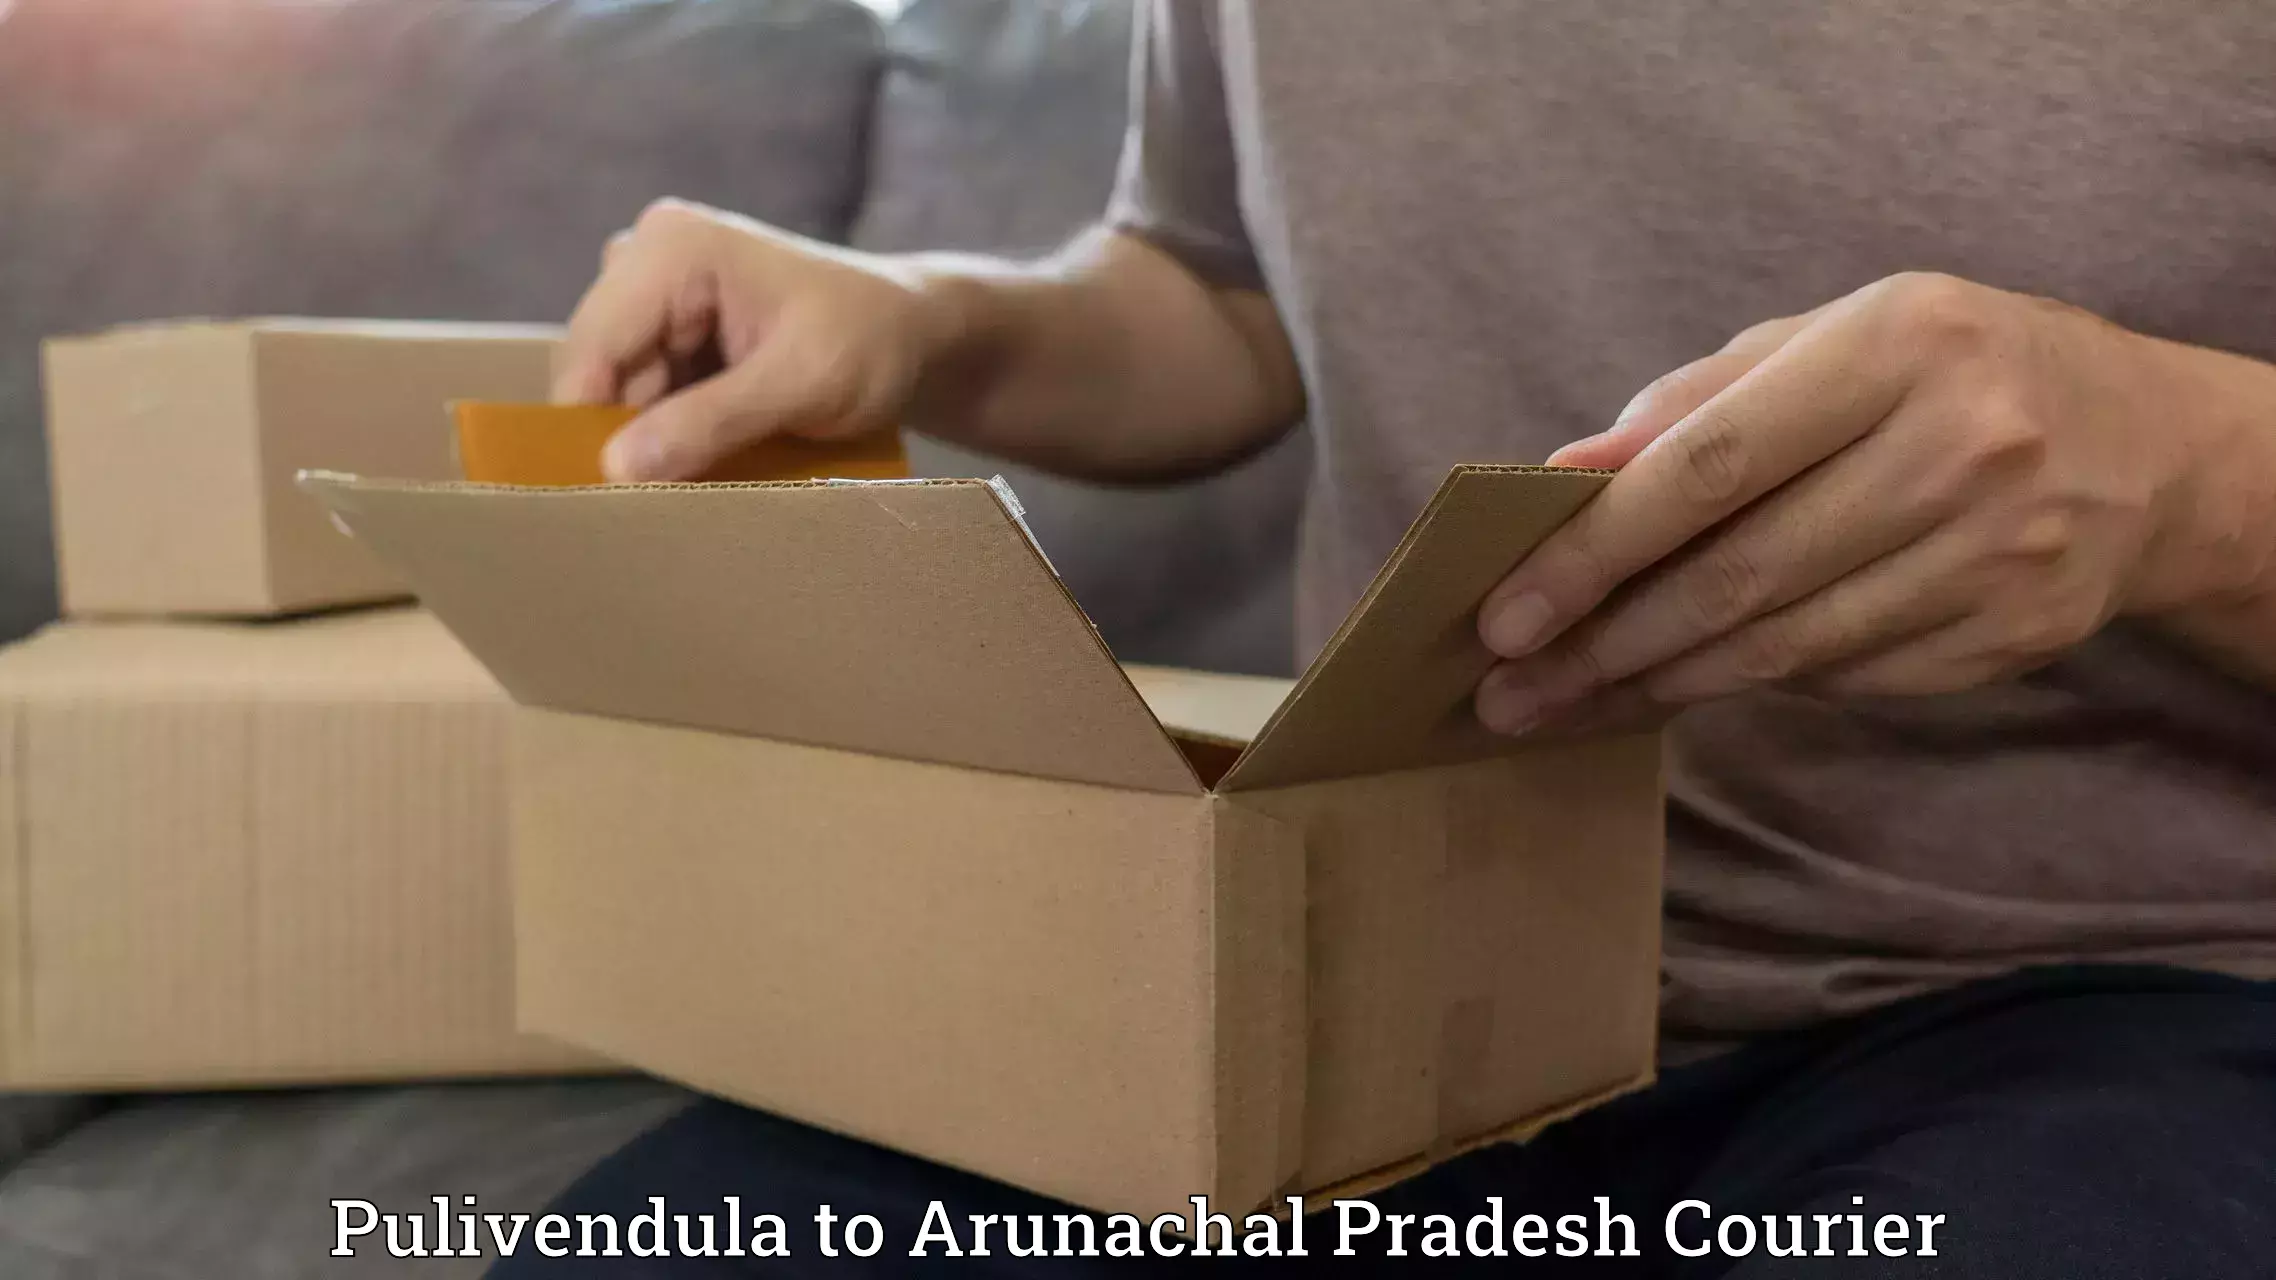 State-of-the-art courier technology Pulivendula to Arunachal Pradesh